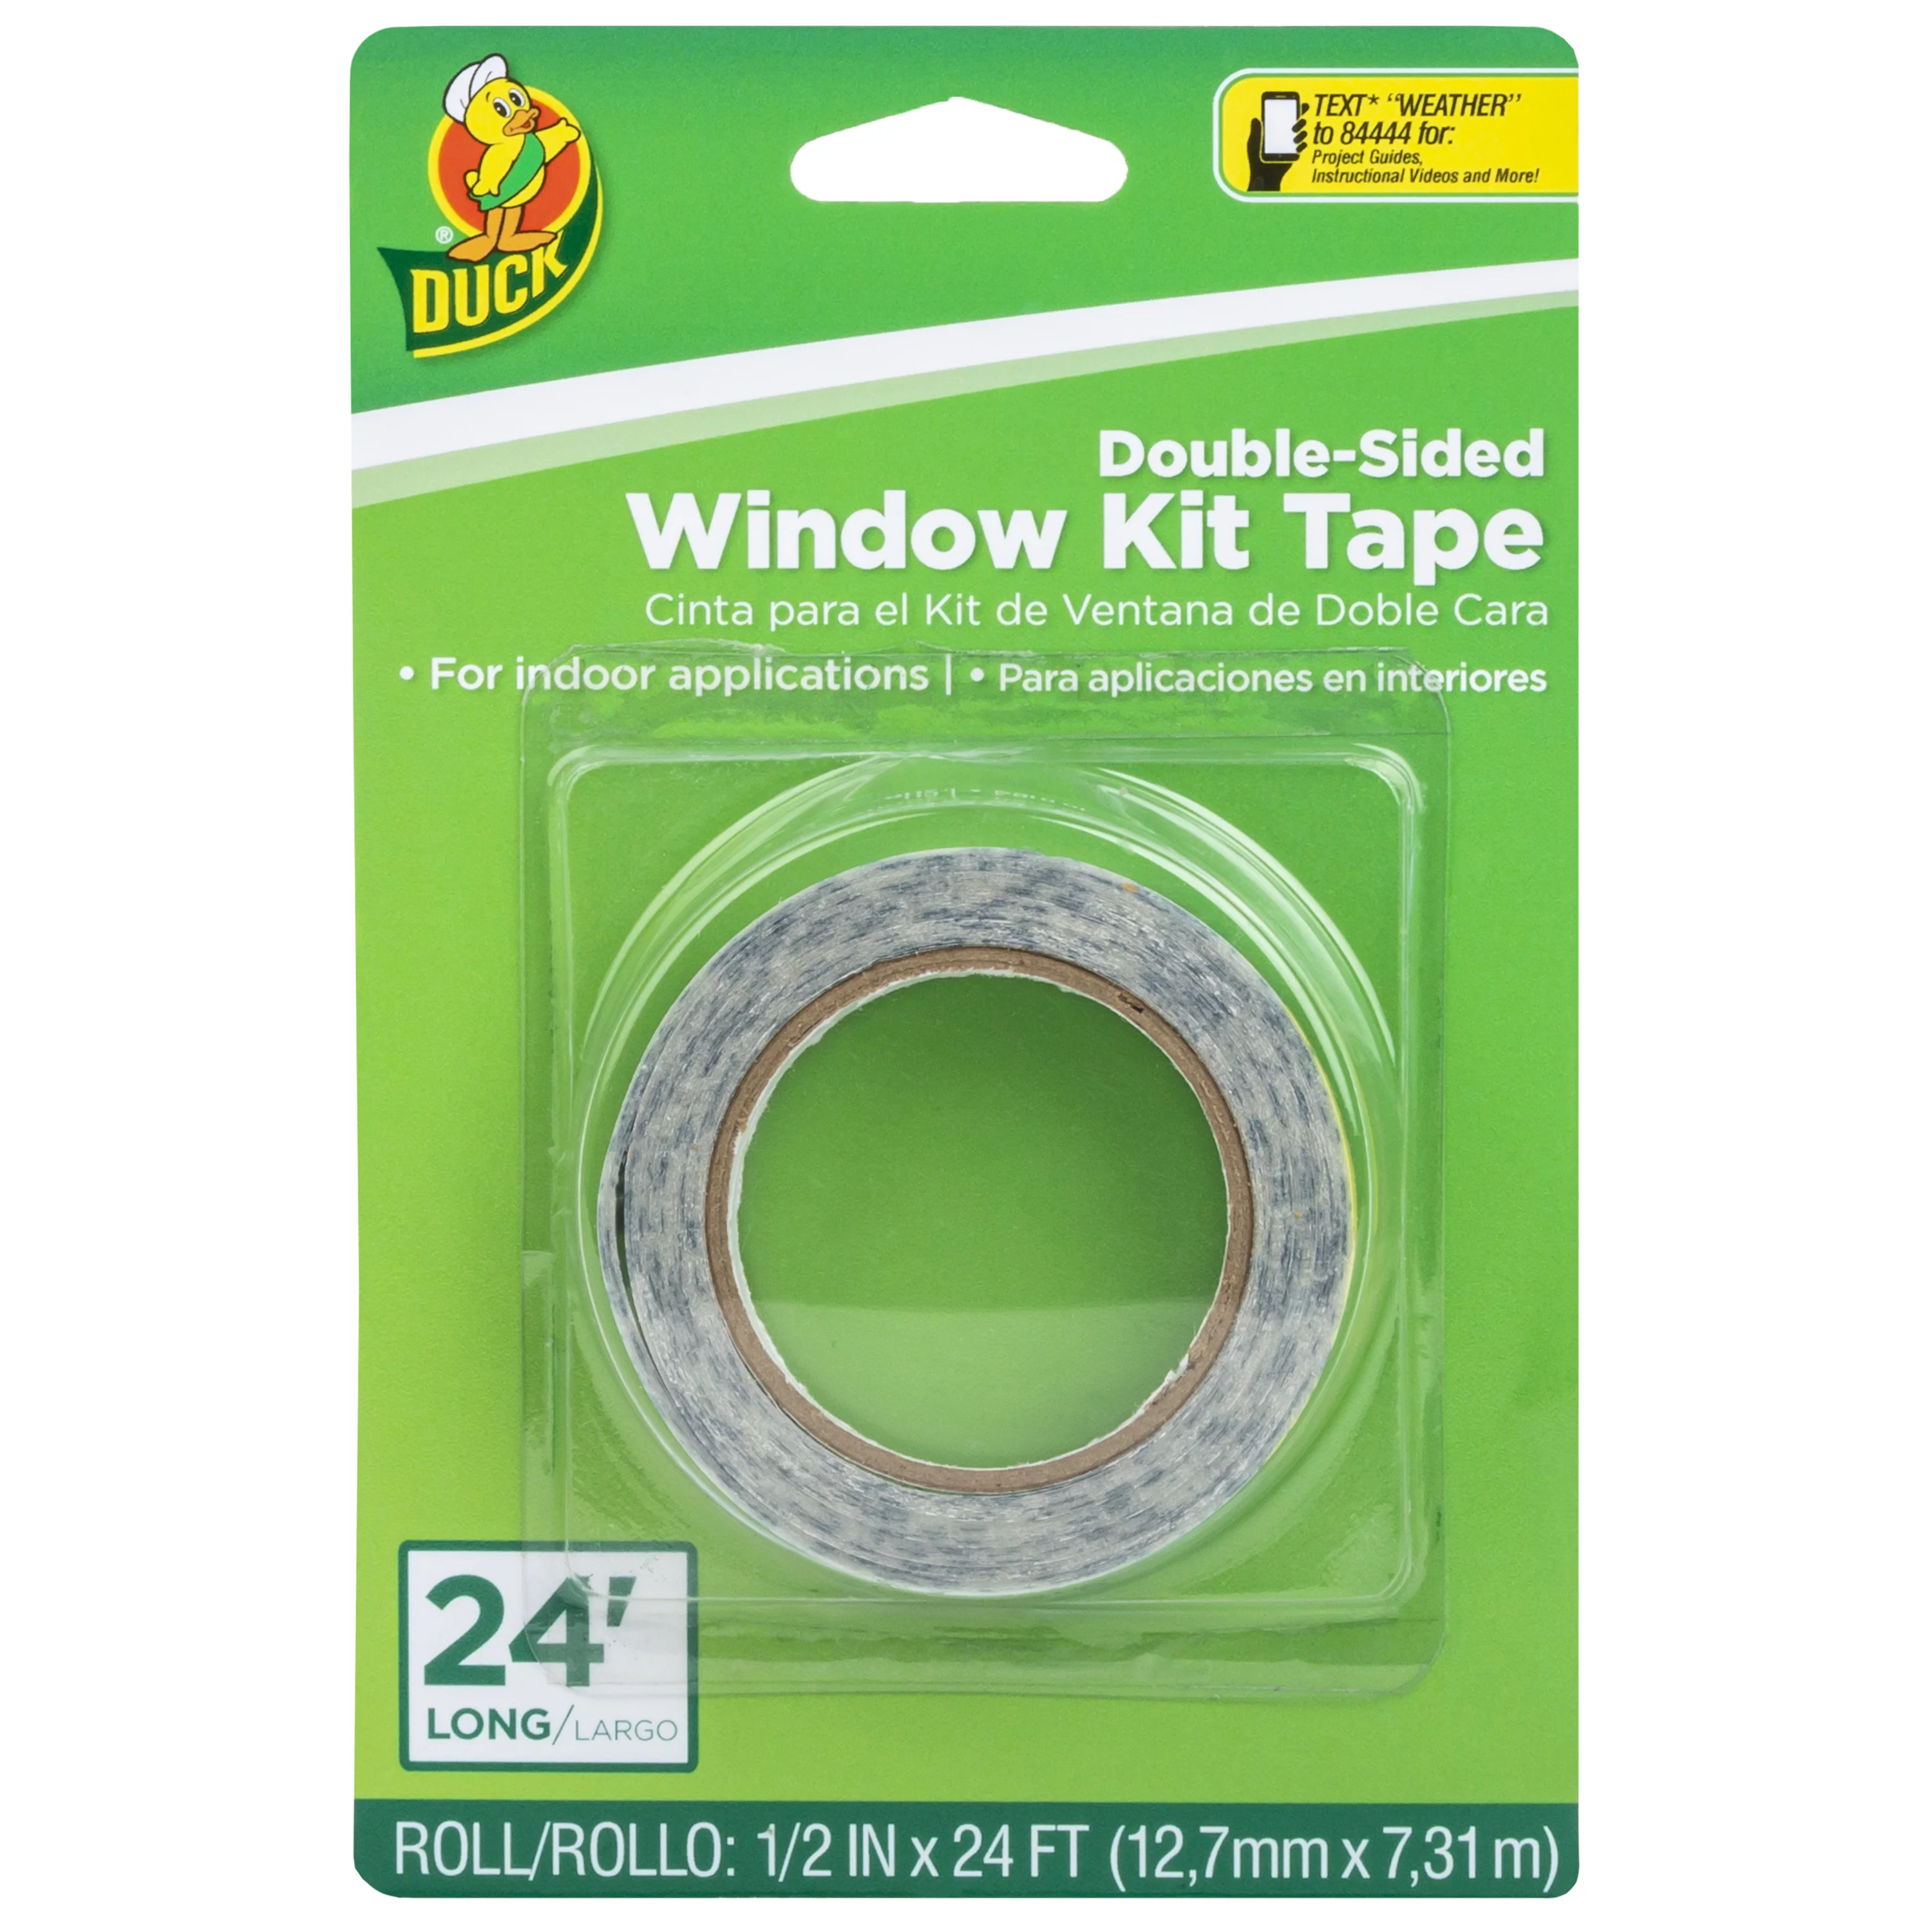 Duck Brand .25 in. x 24 ft. Double-sided Indoor Window Kit Tape